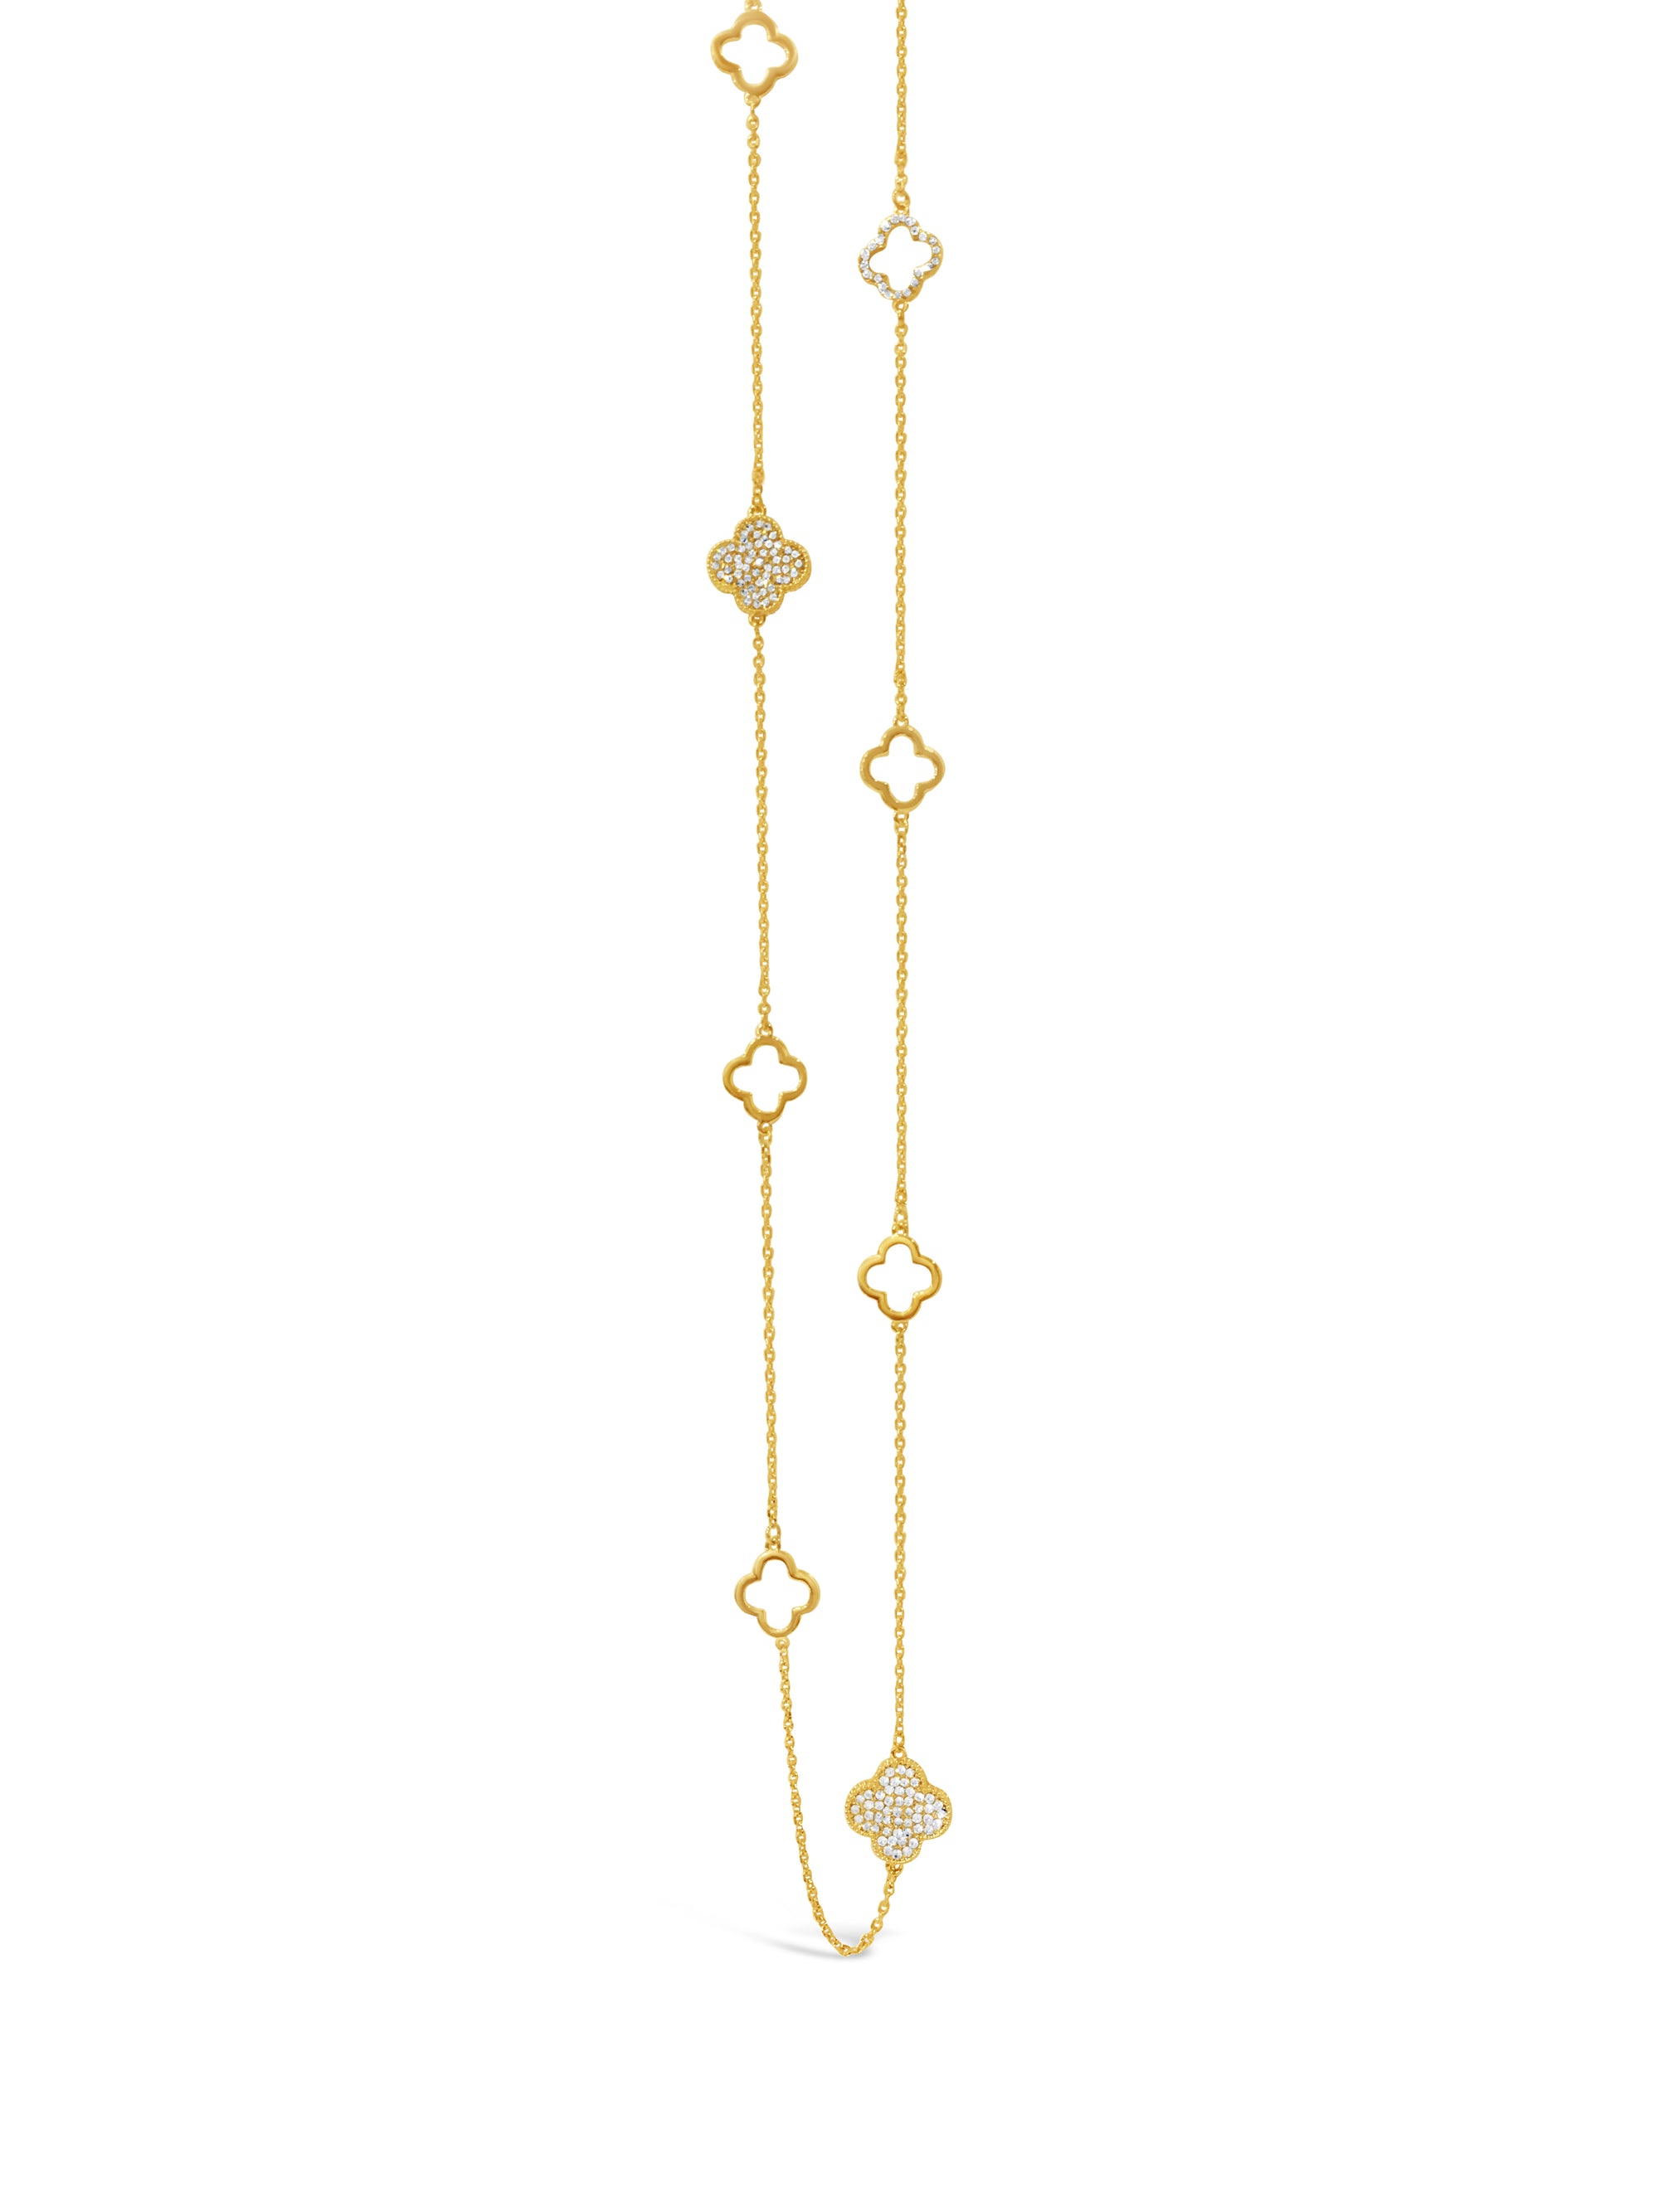 Absolute Jewellery Necklace Gold 44"(Silver & Rose Gold also available)